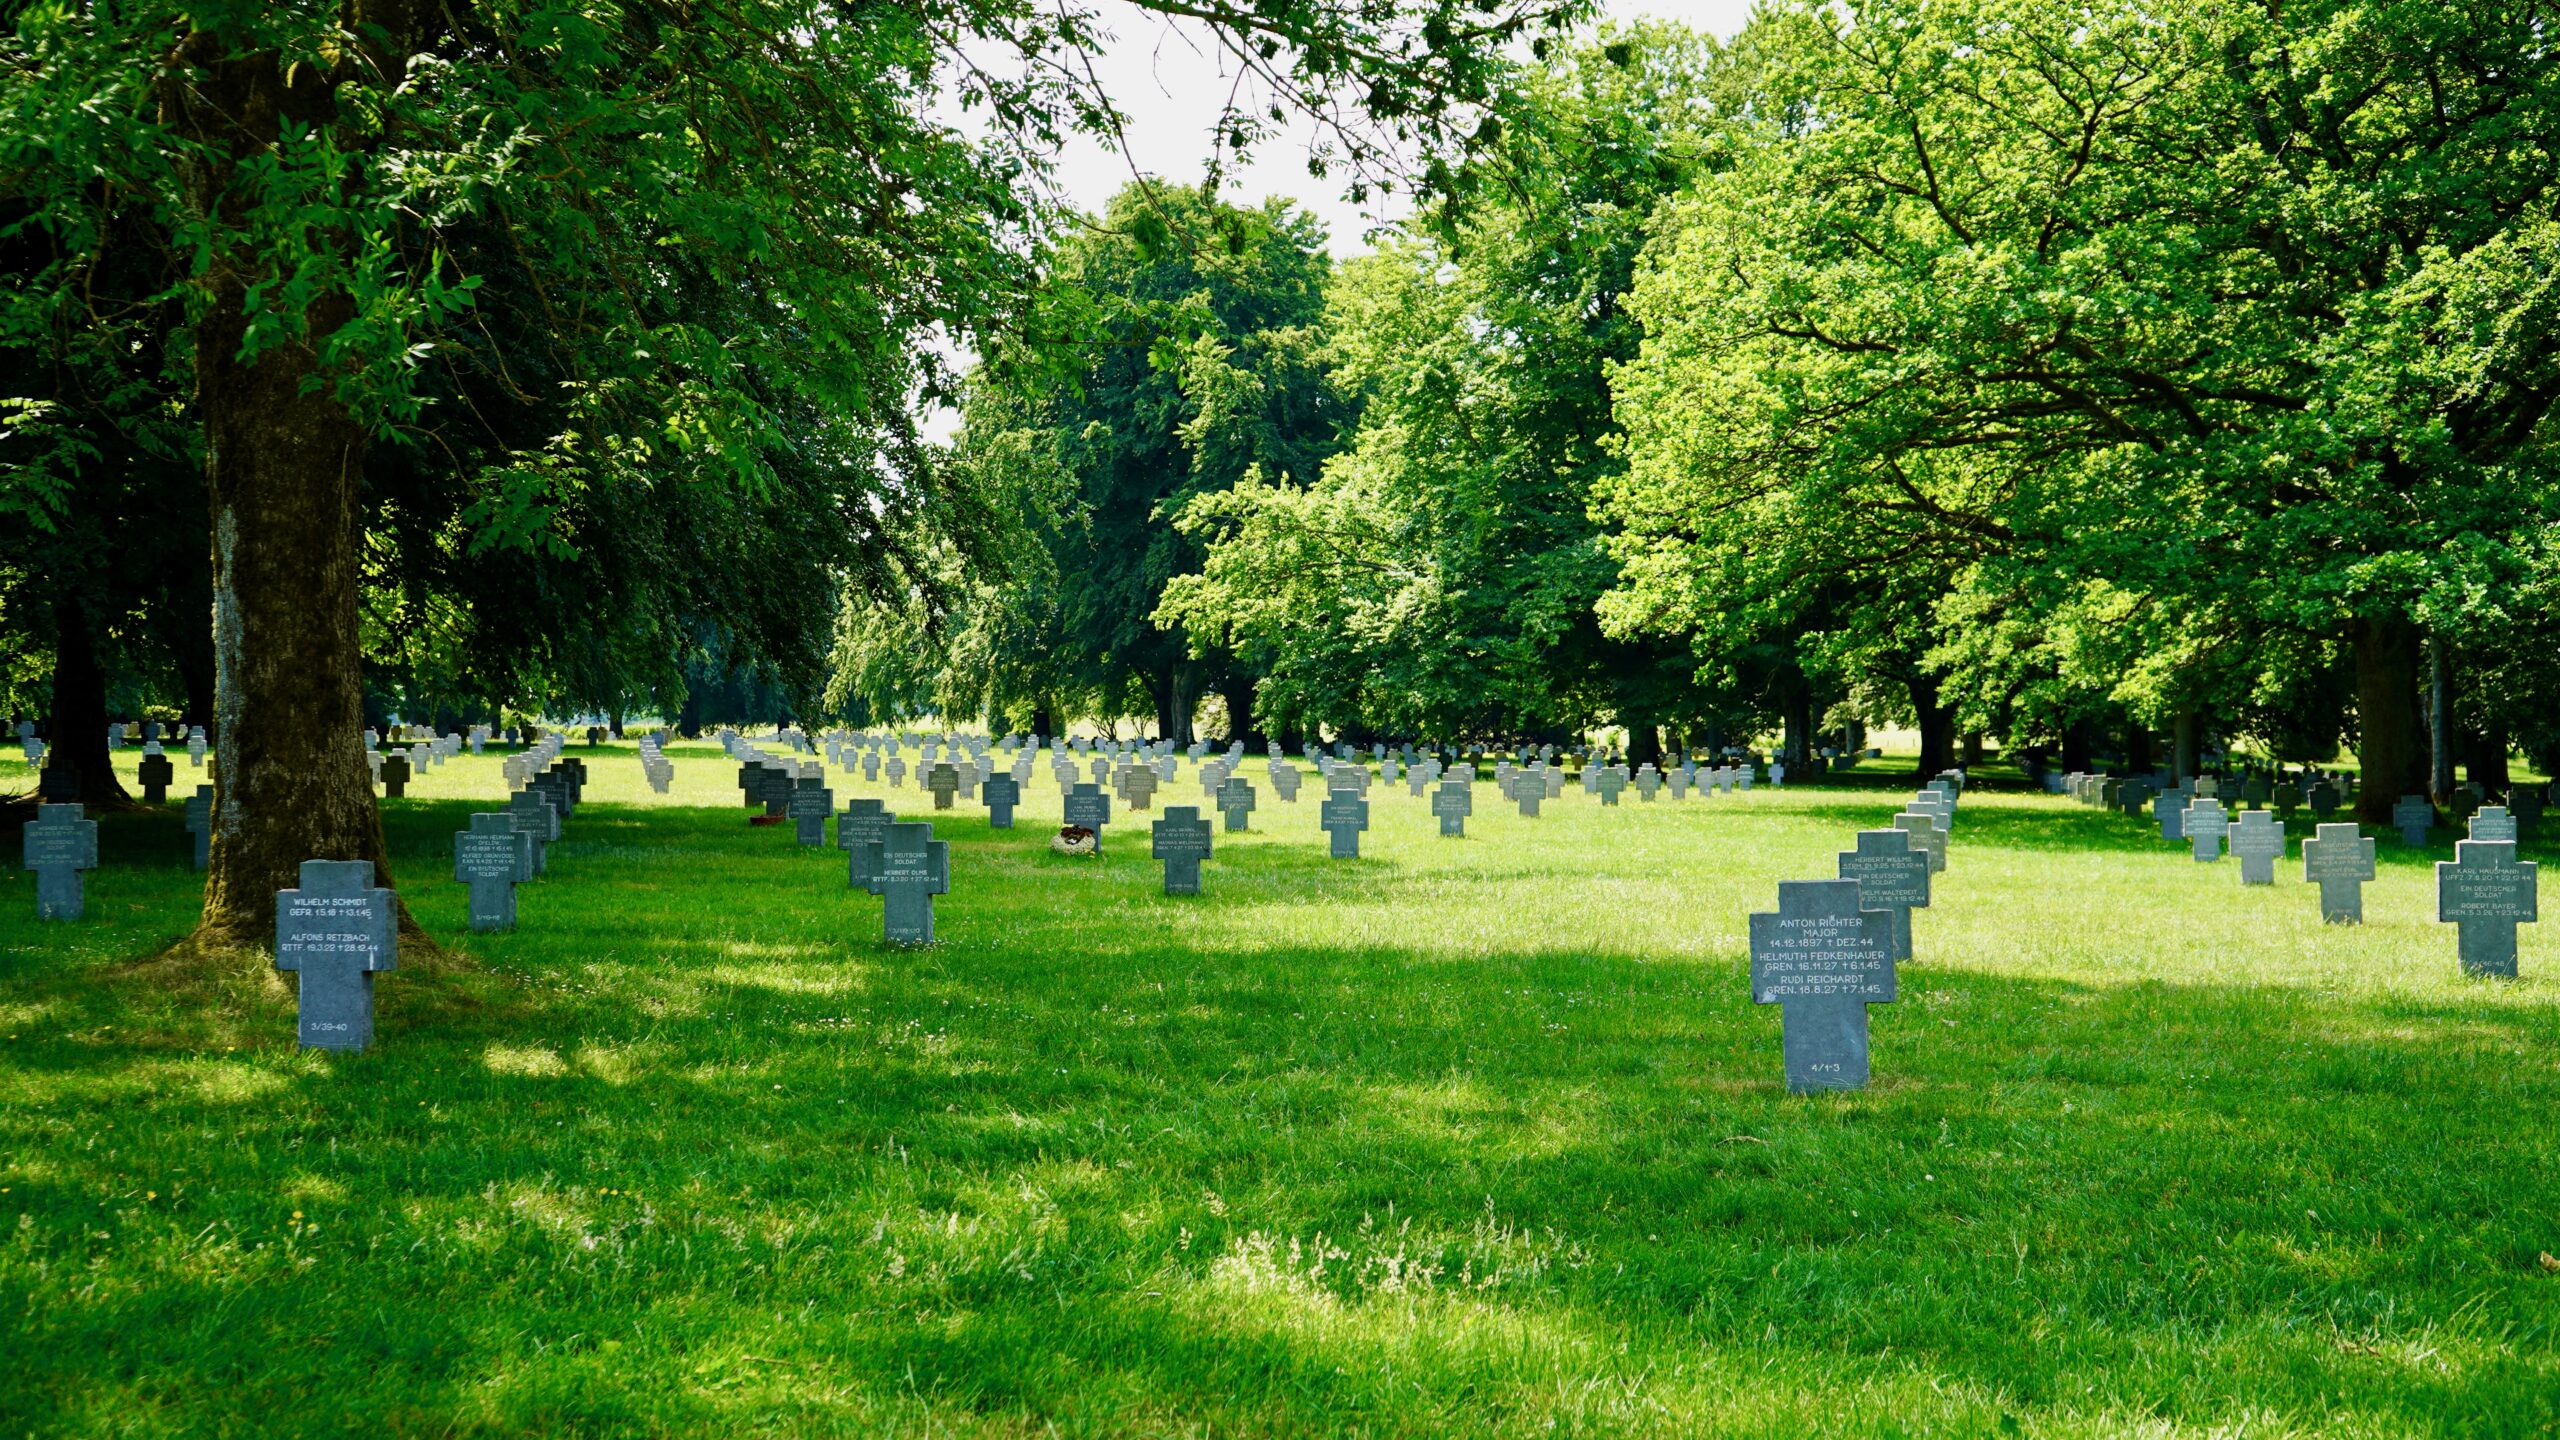 rows of cross shaped headstones in green grass and trees at a german war cemetery